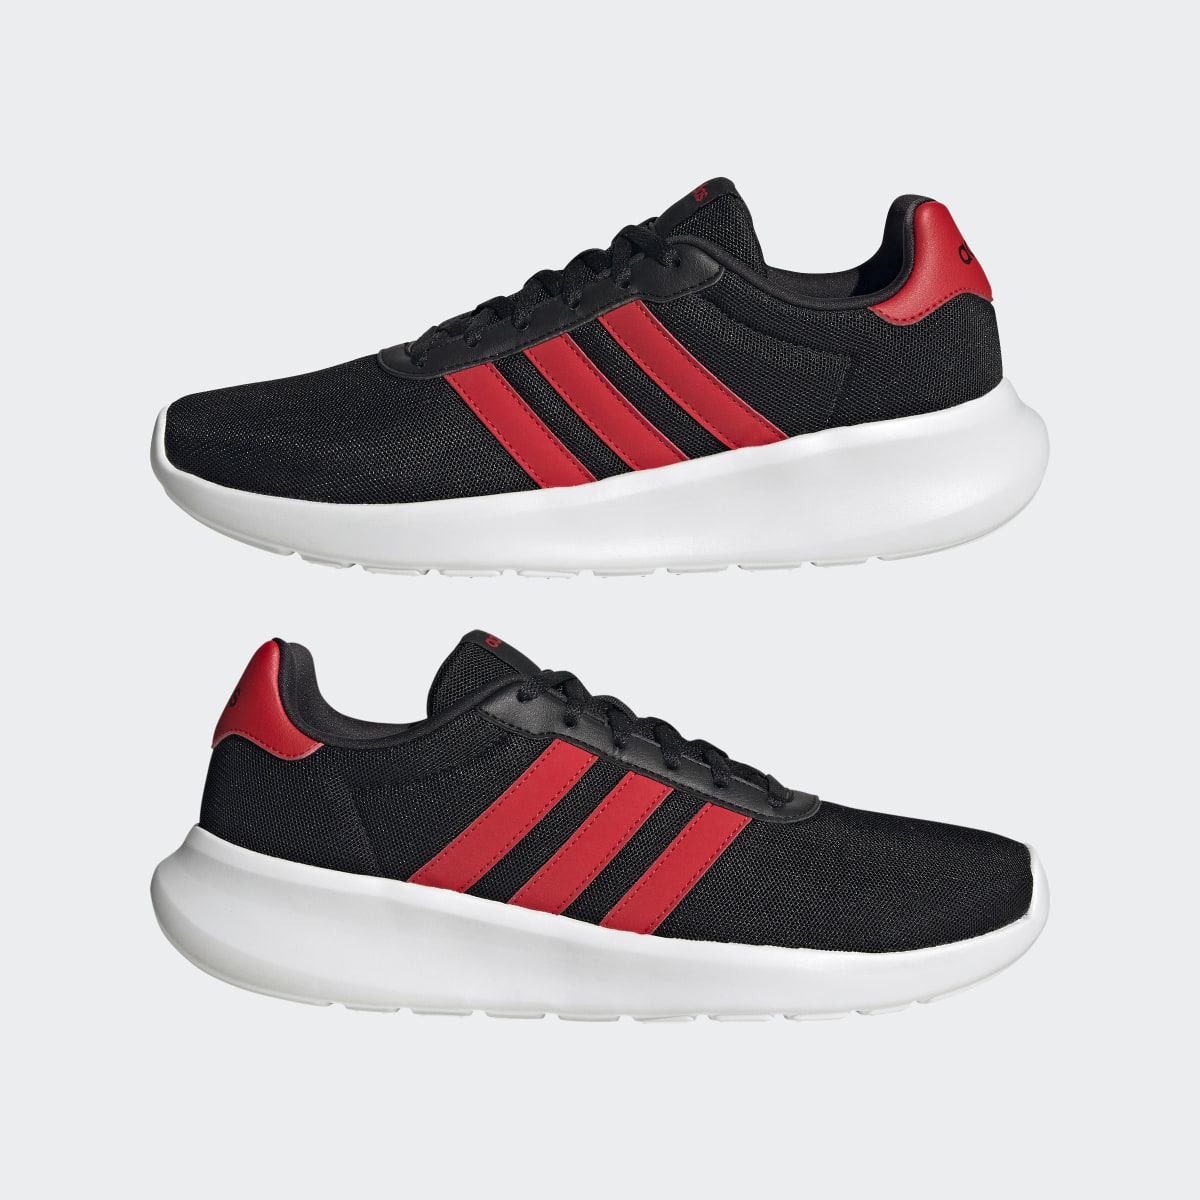 Adidas Lite Racer 3.0 Shoes. 8